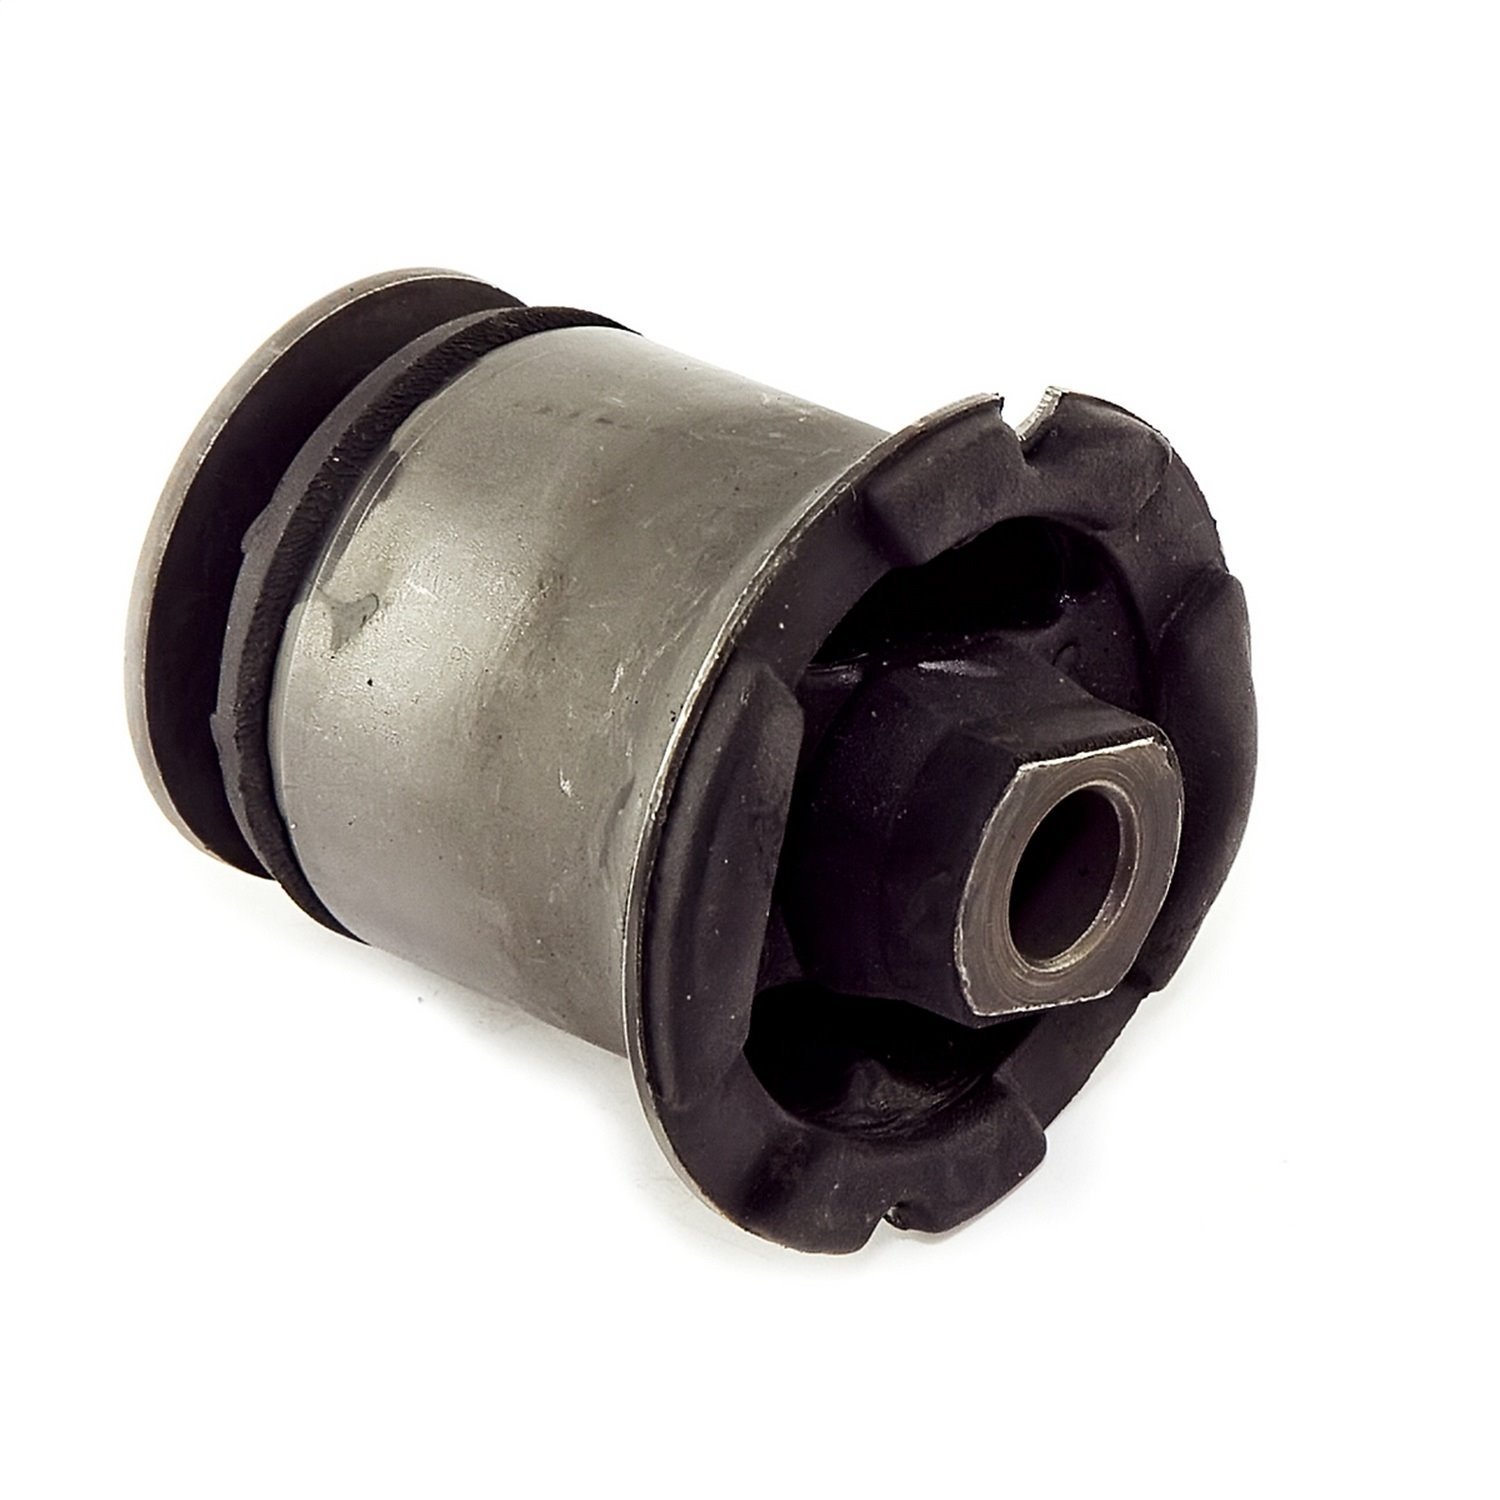 OEM replacement rear upper control arm bushing from